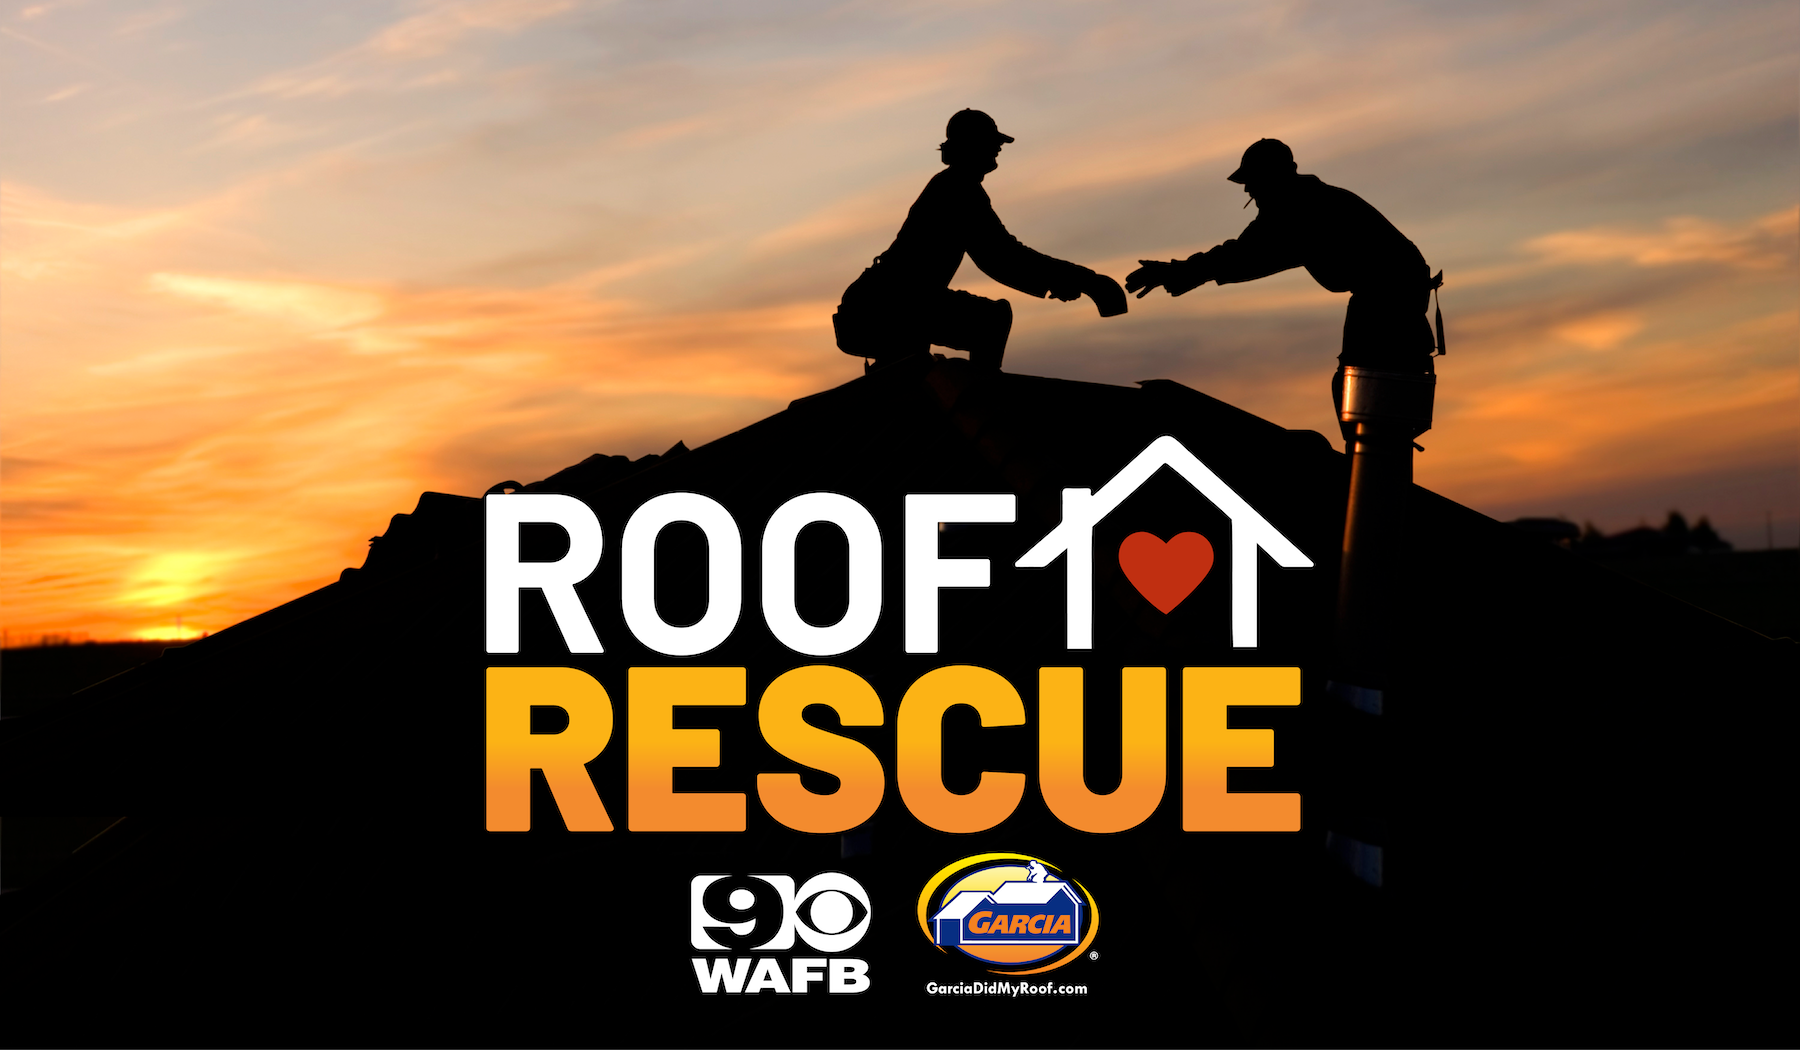 Garcia teams up with WAFB Roof Rescue